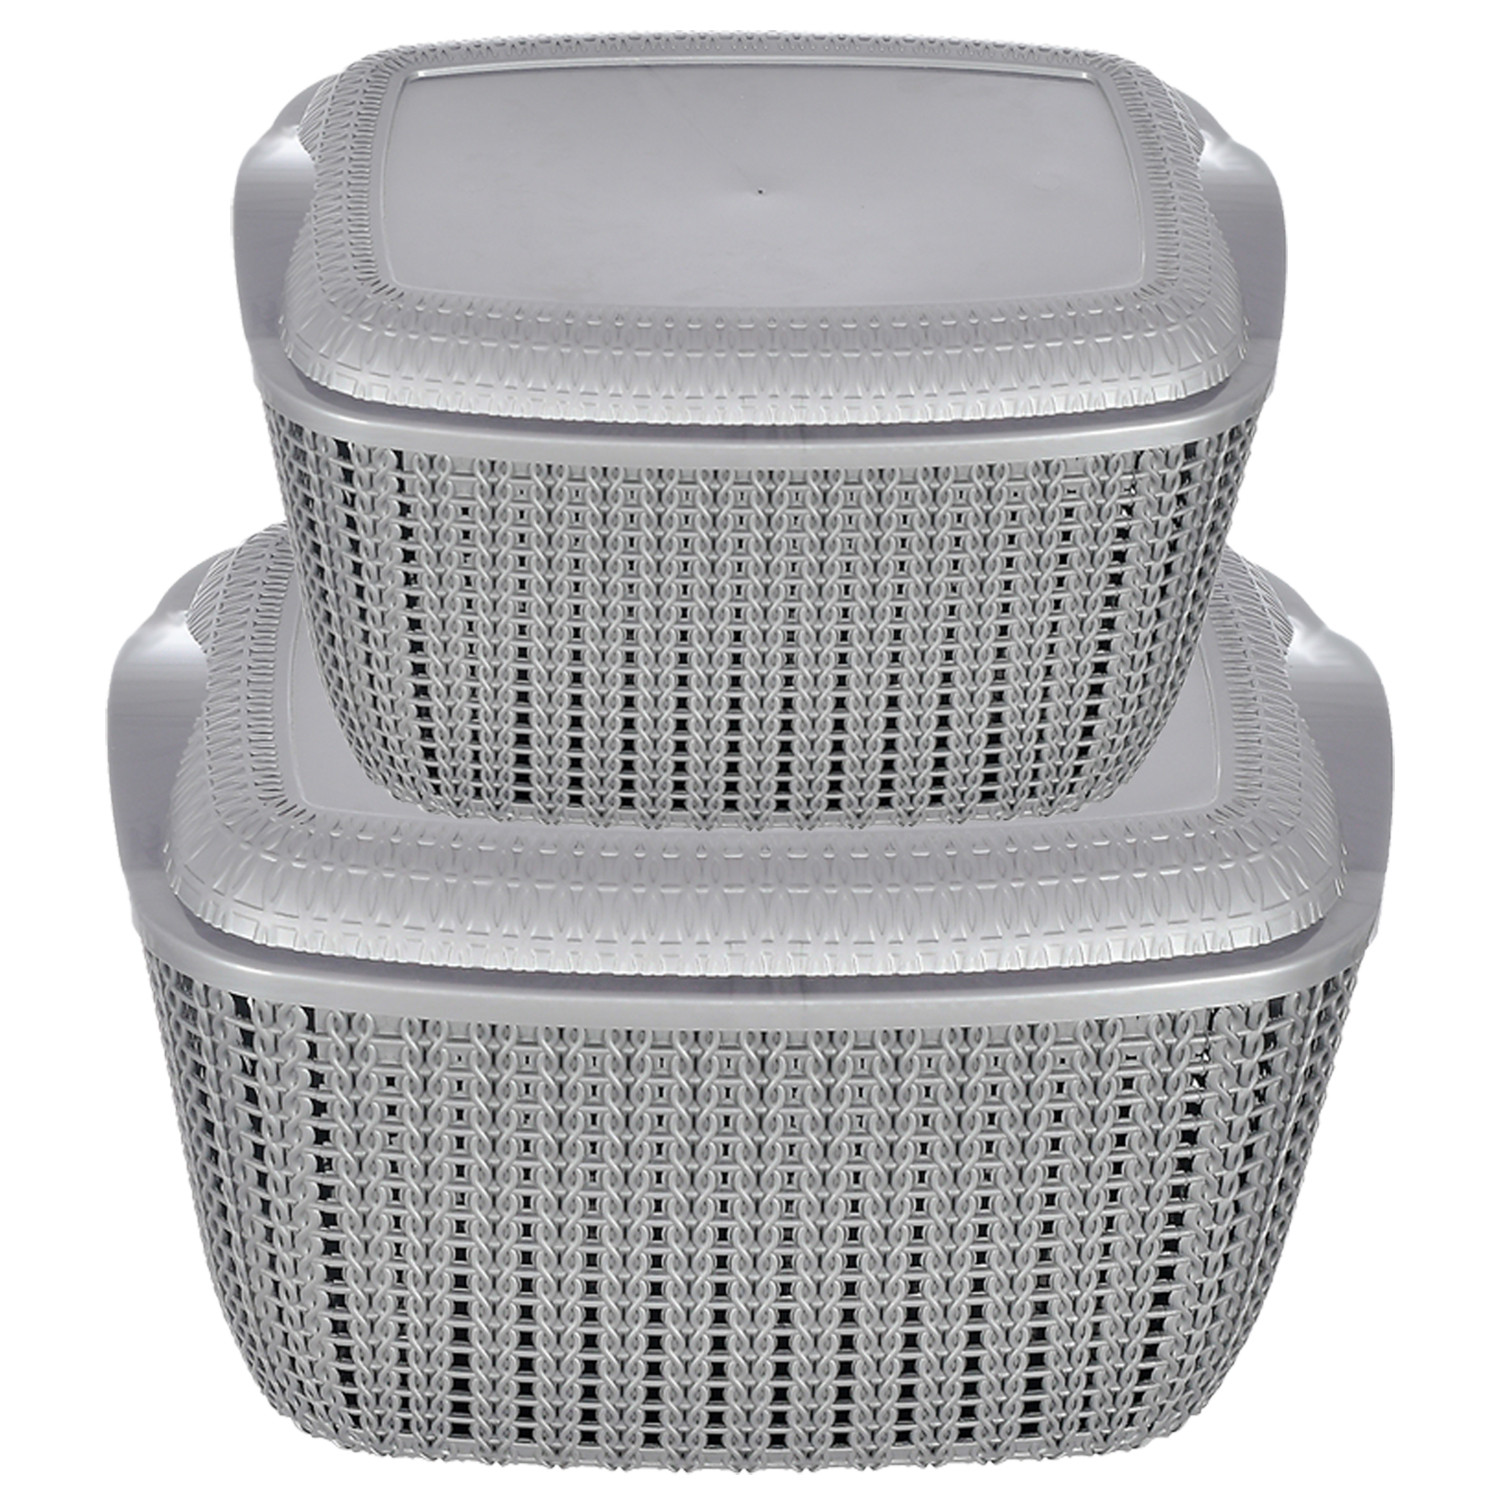 Kuber Industries Multiuses Large & Small M 30-25 Plastic Basket/Organizer With Lid- (Grey) -46KM057